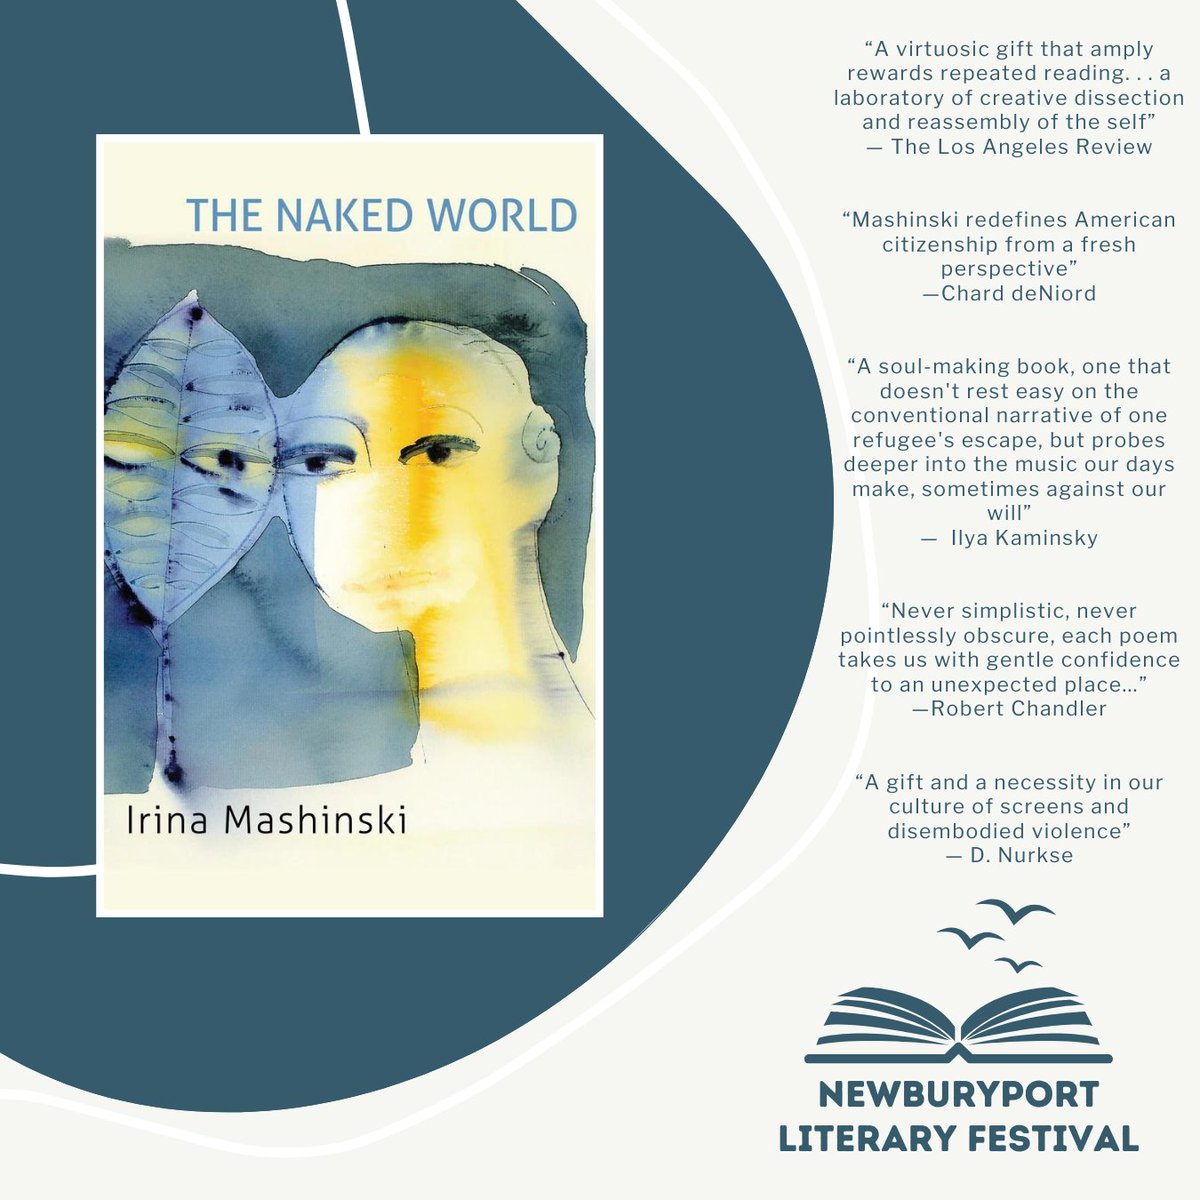 Russian-American poet and essayist, Irina Mashinski, has released her first book written in english, The Naked World. One rarely reads poems as closely tied to world events—Irina Mashinski is not to be missed! Saturday, 4/27, 10:15AM at the Central Congregational Church.